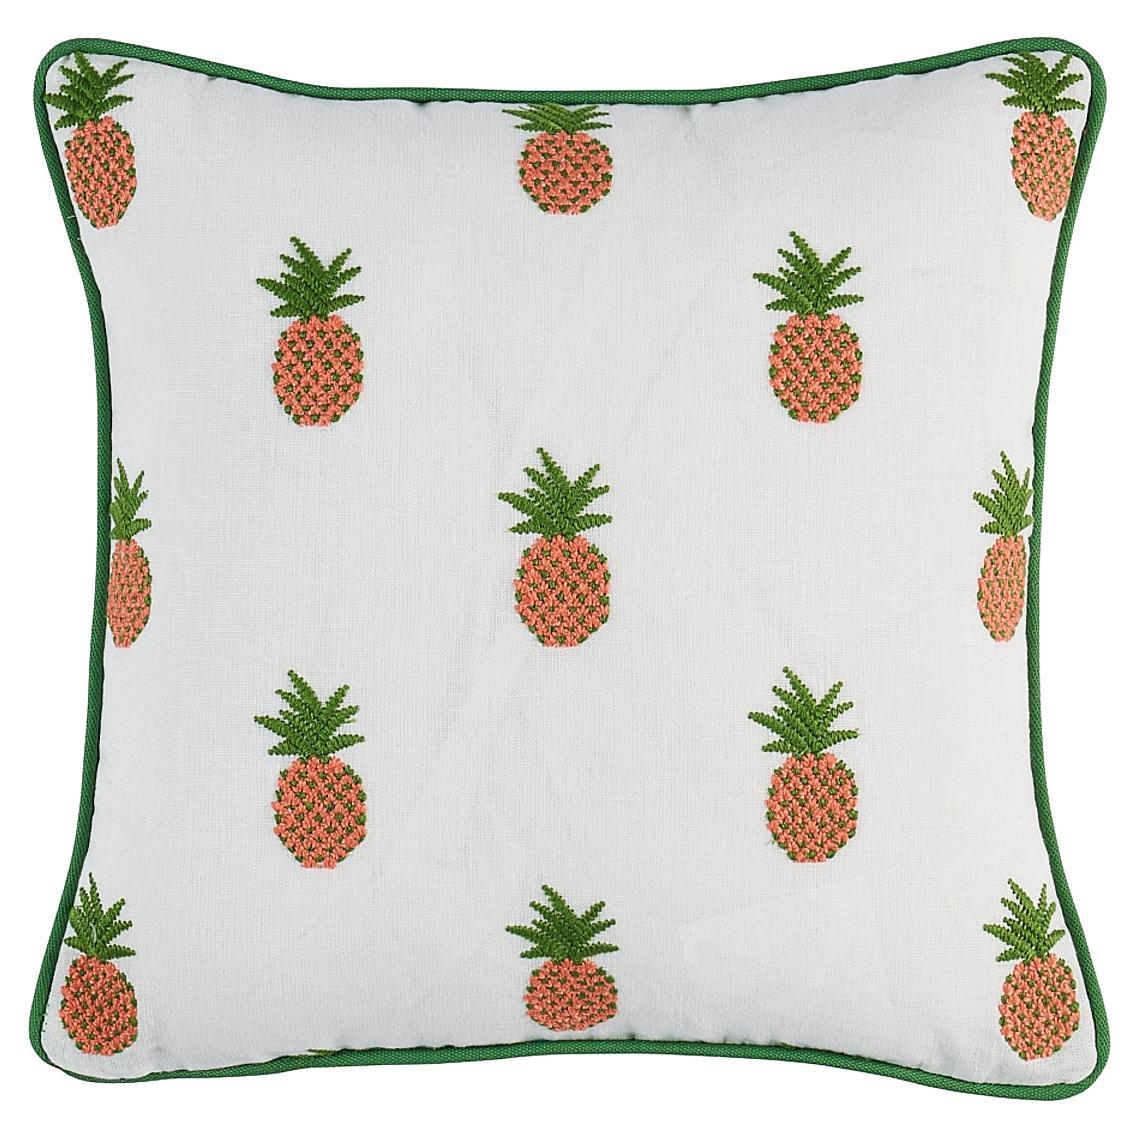 Schumacher Pineapple Embroidery 14" Pillow in Apricot/Ivory